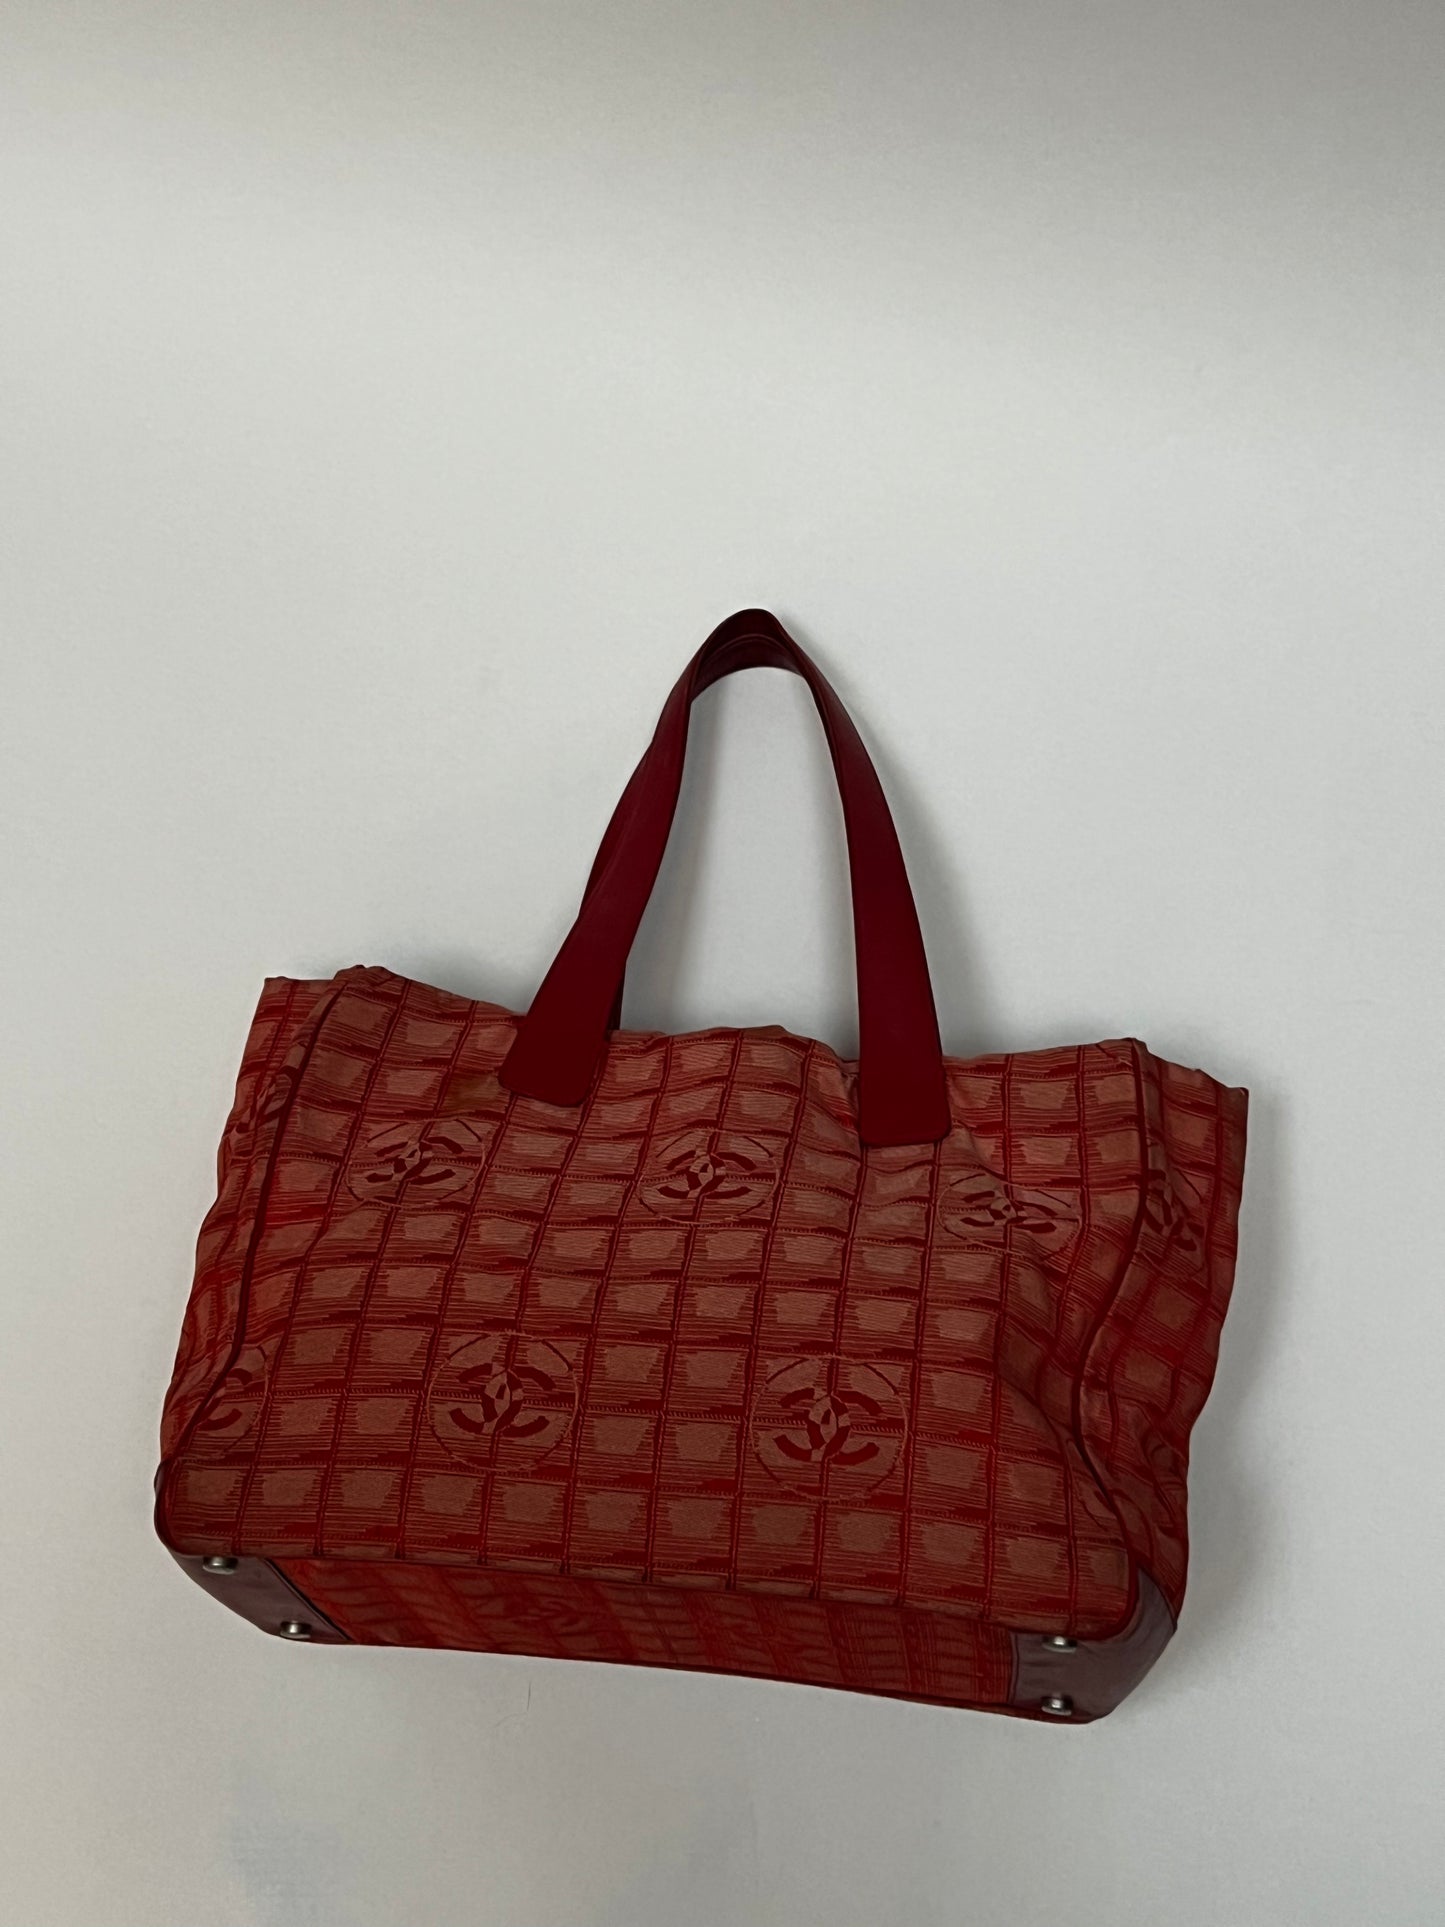 Chanel travel tote